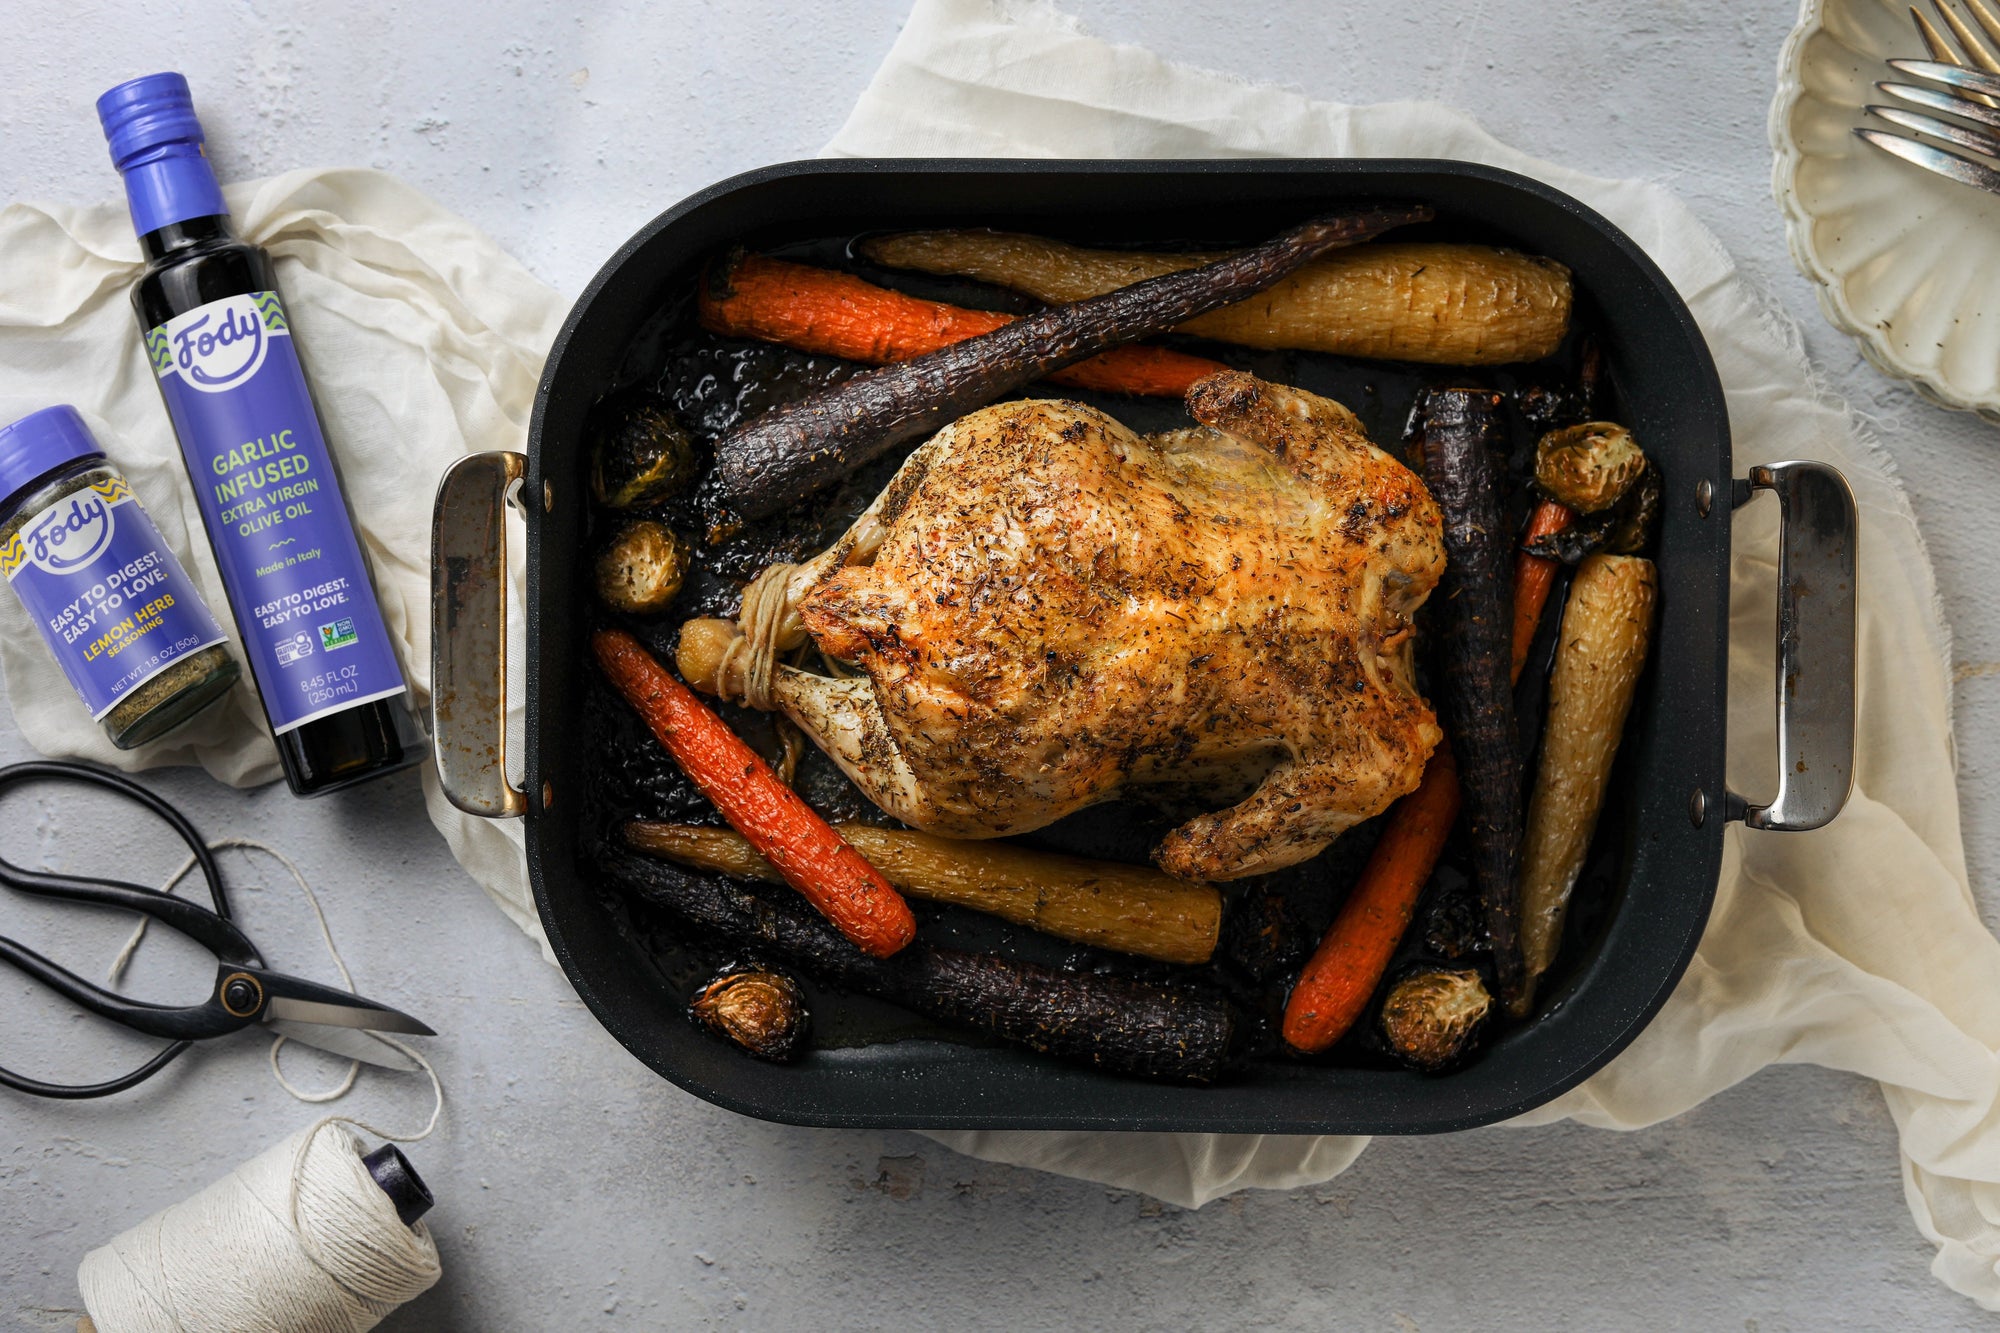 A Thanksgiving Roast Chicken in a Pan with parsnips, carrots and Brussels sprouts, beside a bottle of Fody-brand olive oil.